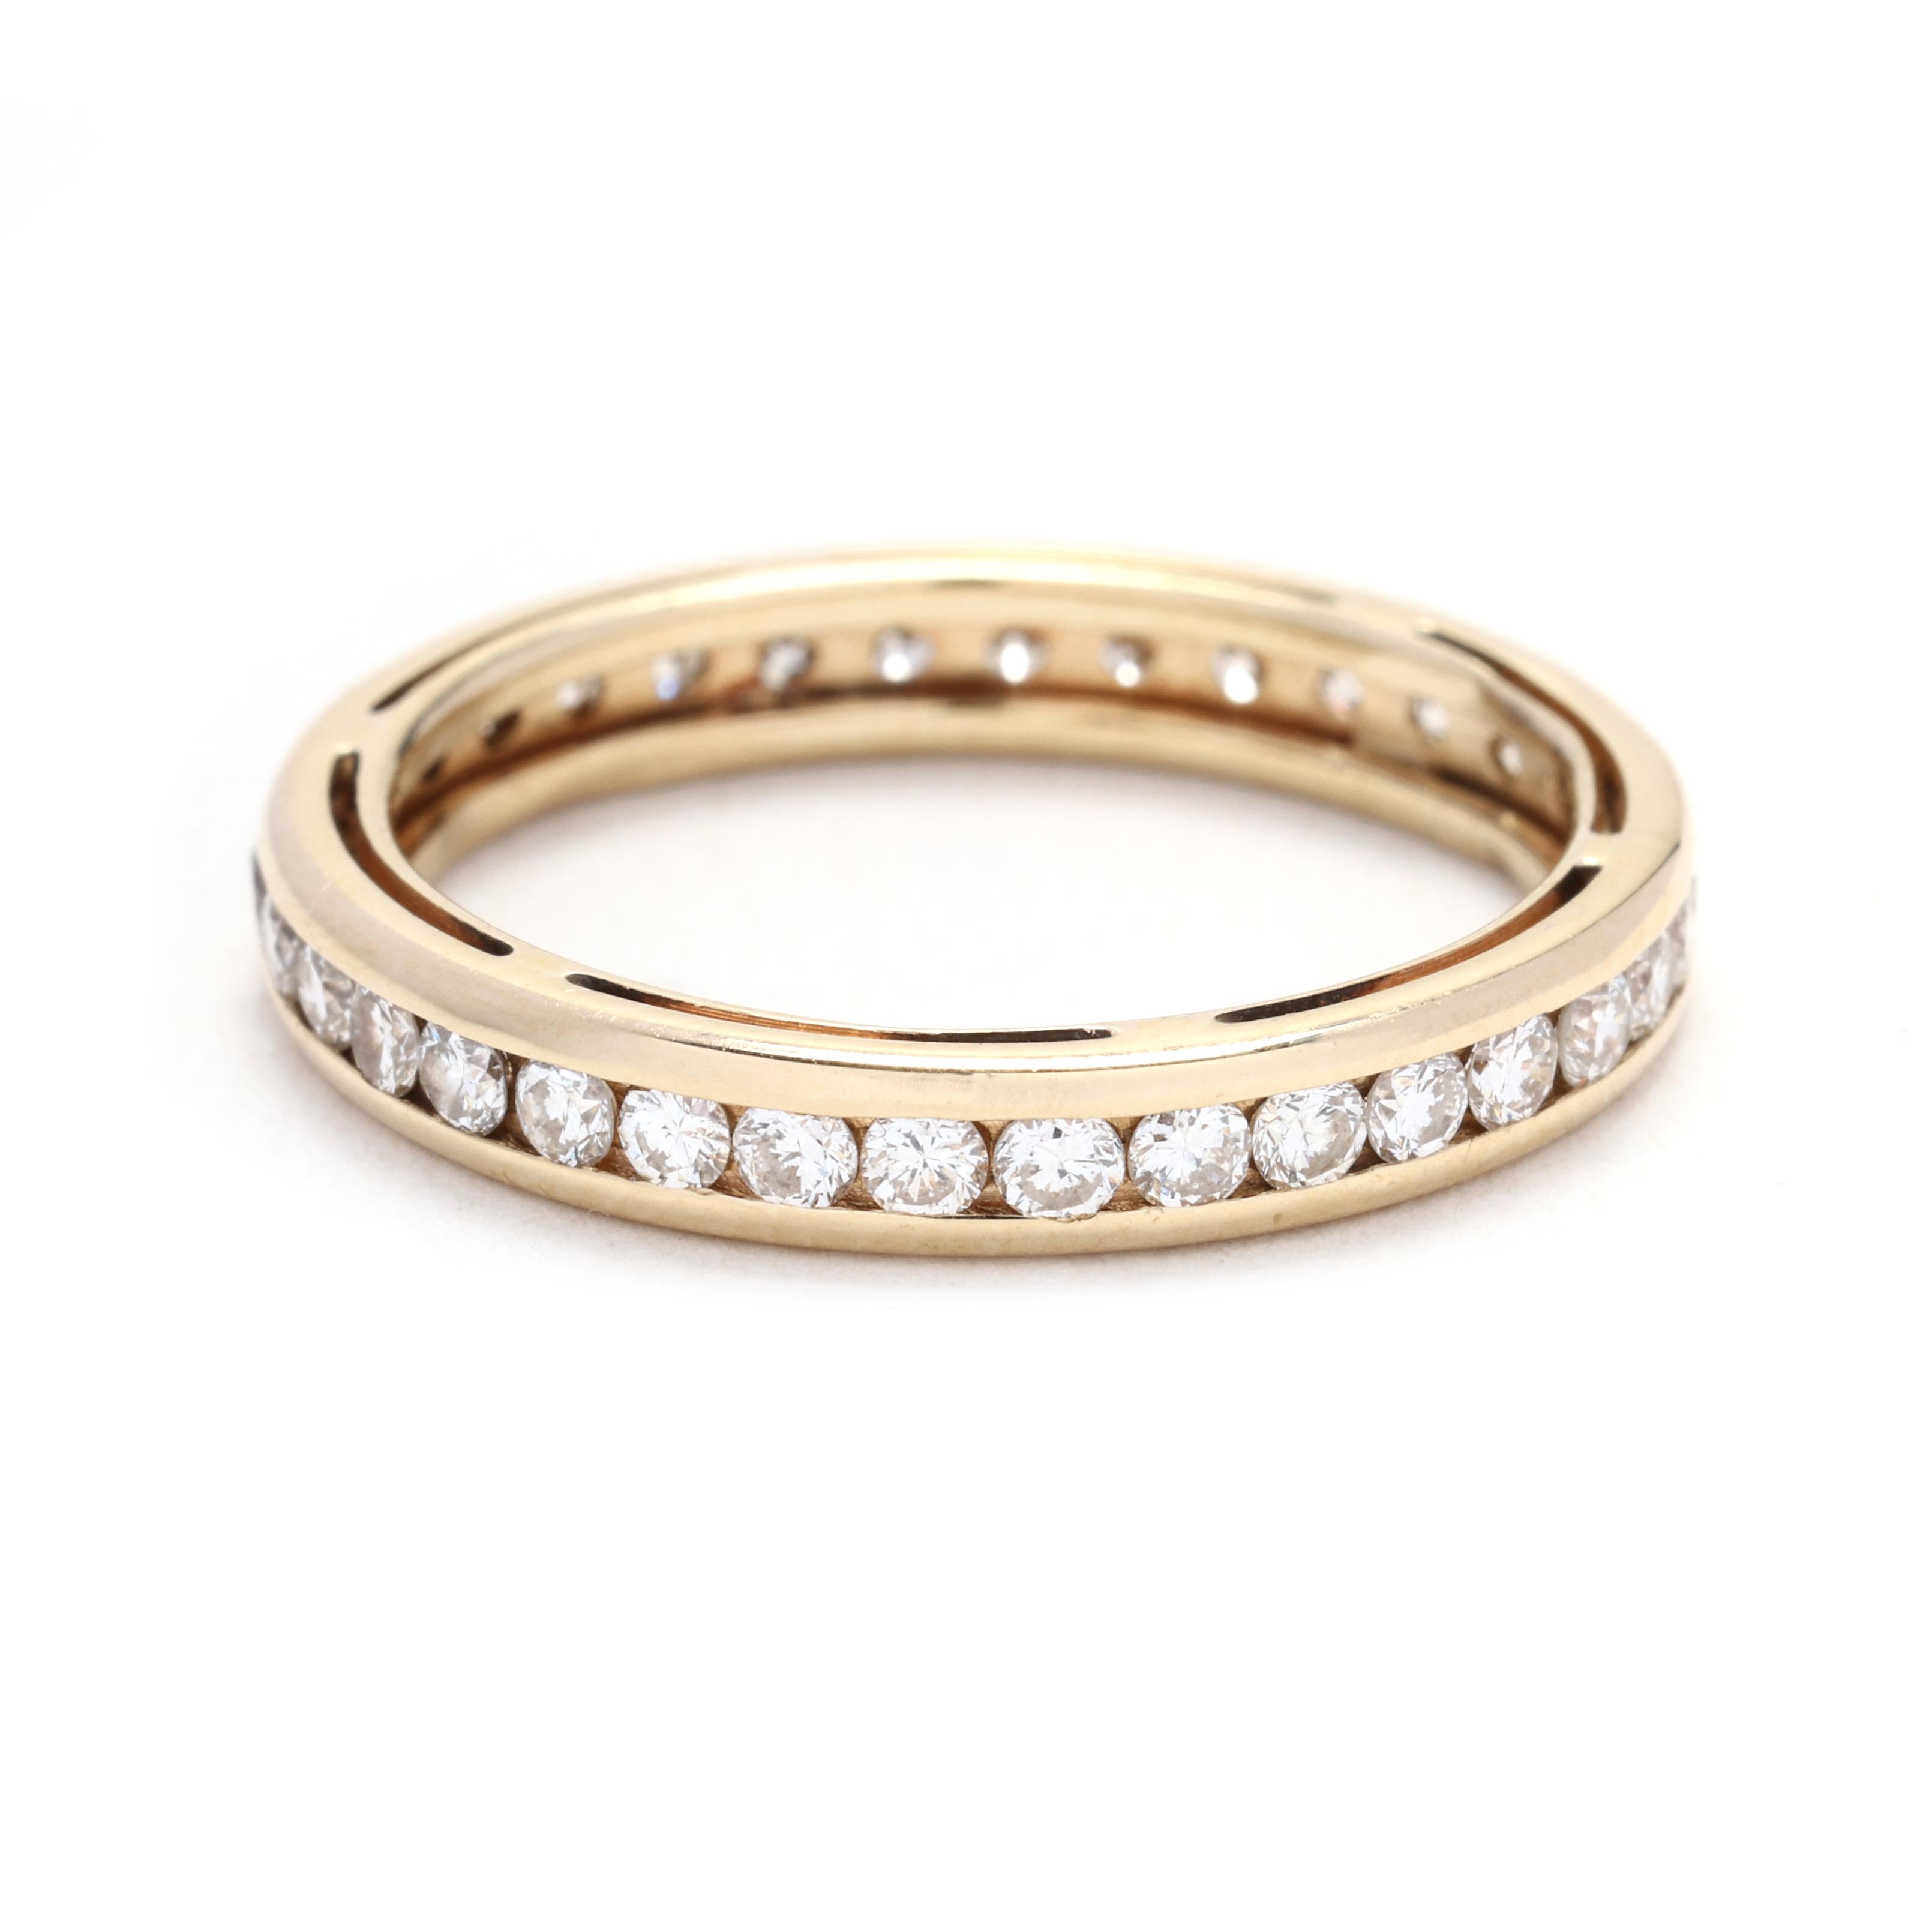 With a total carat weight of 0.75, this diamond and gold band ring is a truly mesmerizing piece. Crafted in 14k yellow gold, this ring features a row of sparkling diamonds that encircle the entire band. The diamonds are of high quality and emit a